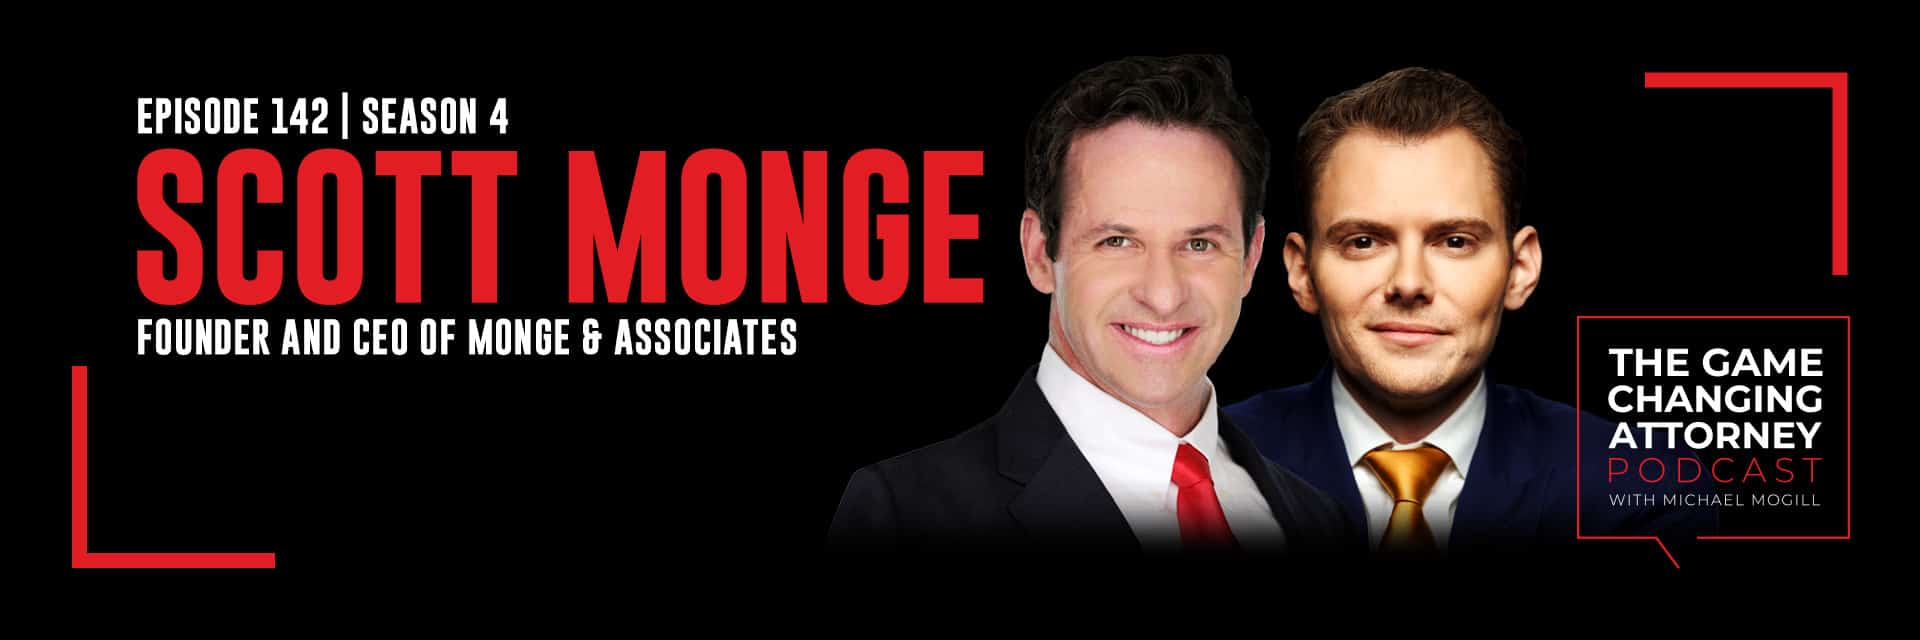 The Game Changing Attorney Podcast: Scott Monge